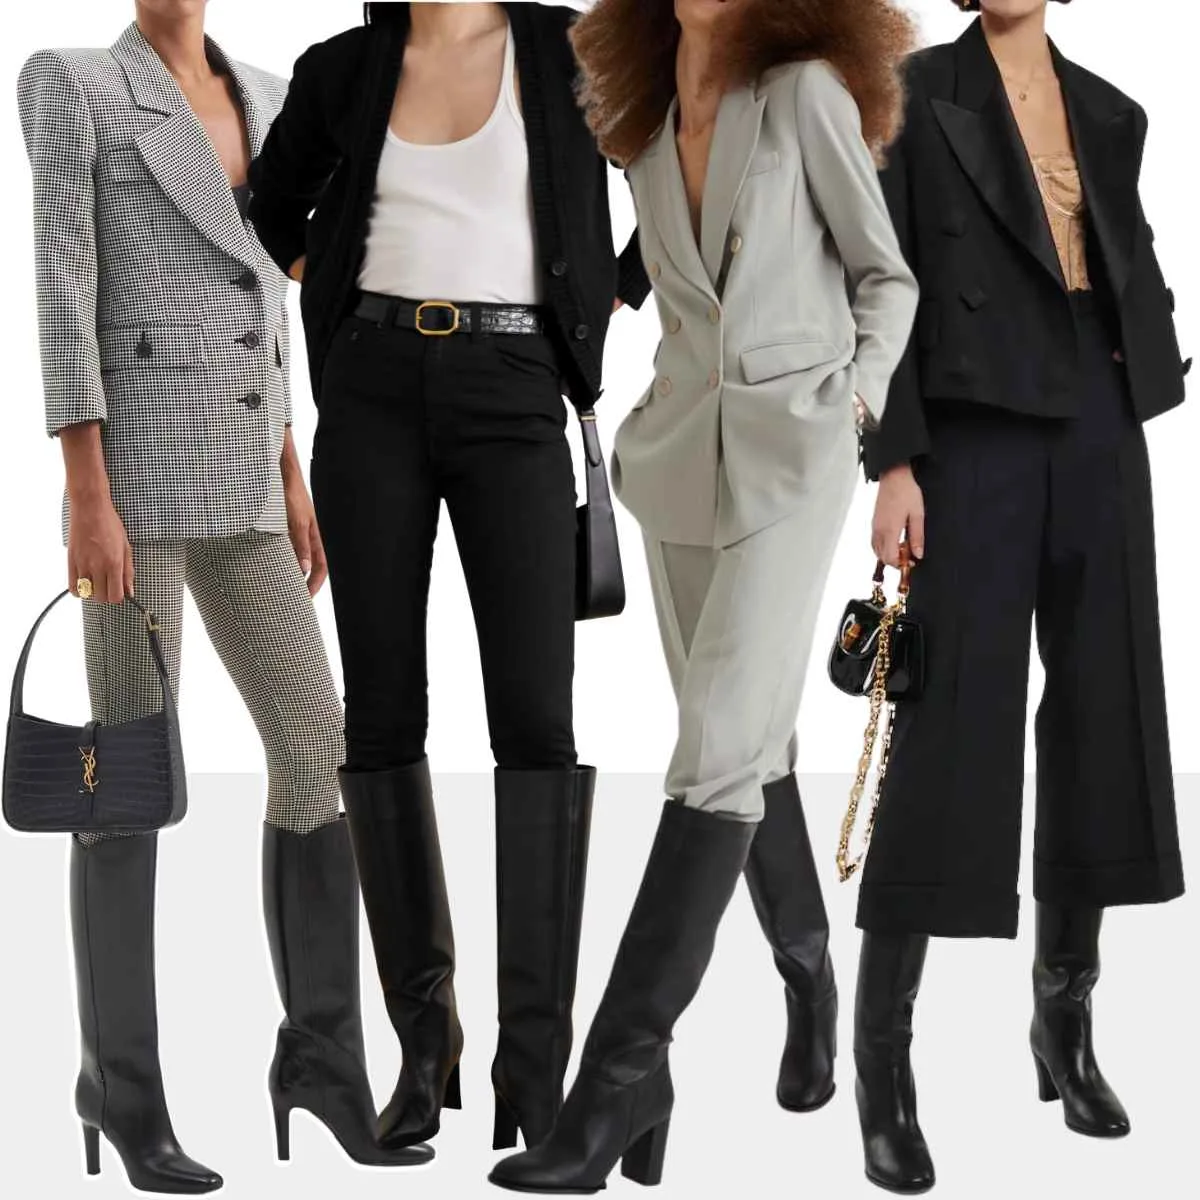 Collage of 5 women wearing various pantsuits with knee boots.